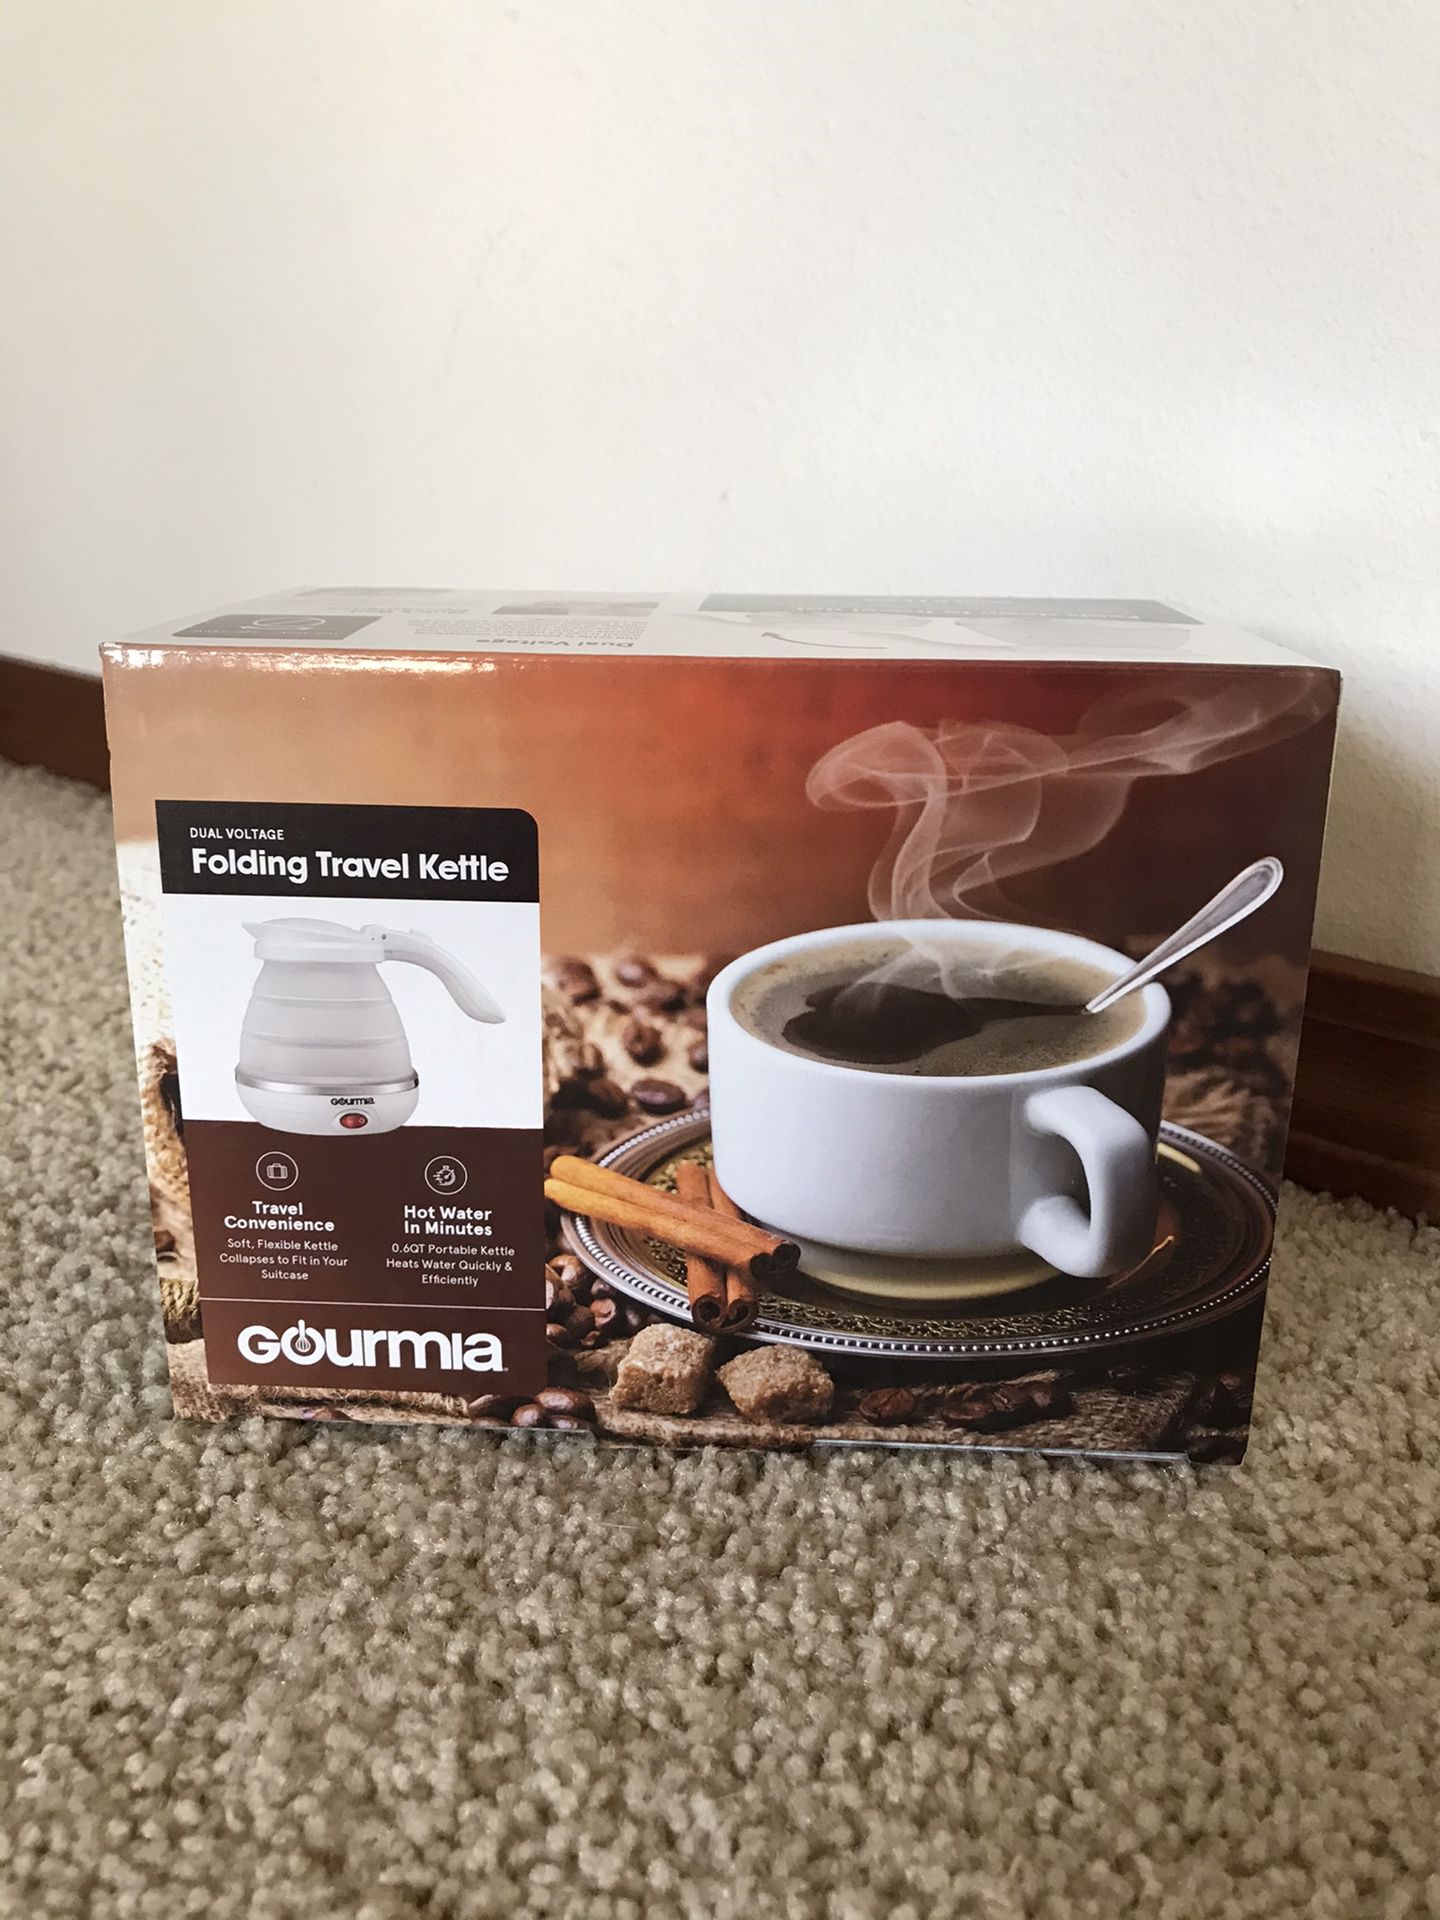 Gourmia Travel Kettle - new in box - Sale pending